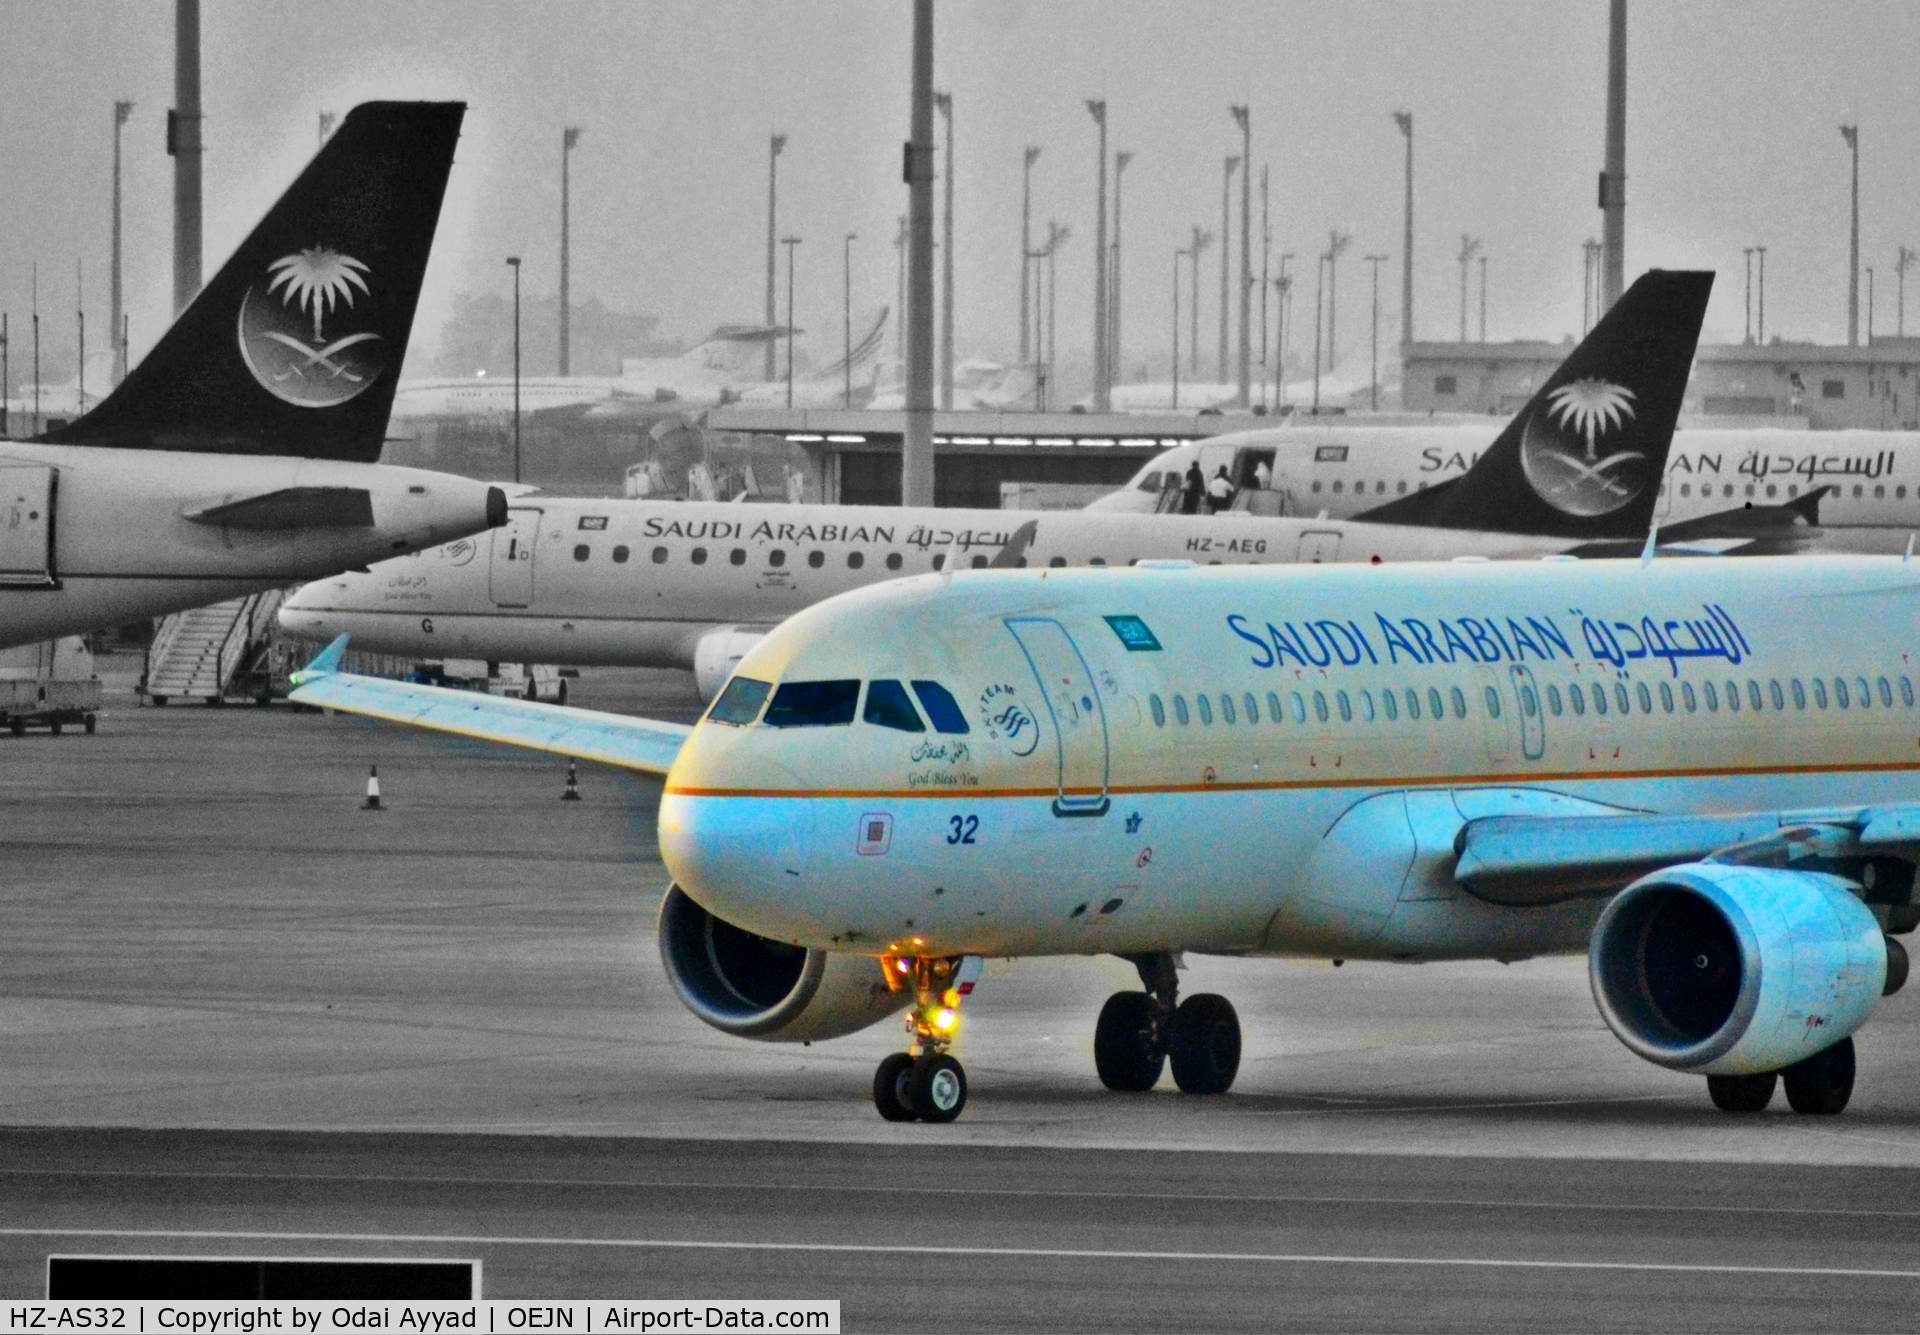 HZ-AS32, 2010 Airbus A320-214 C/N 4273, Taxi out to runway 34L at jeddah Airport